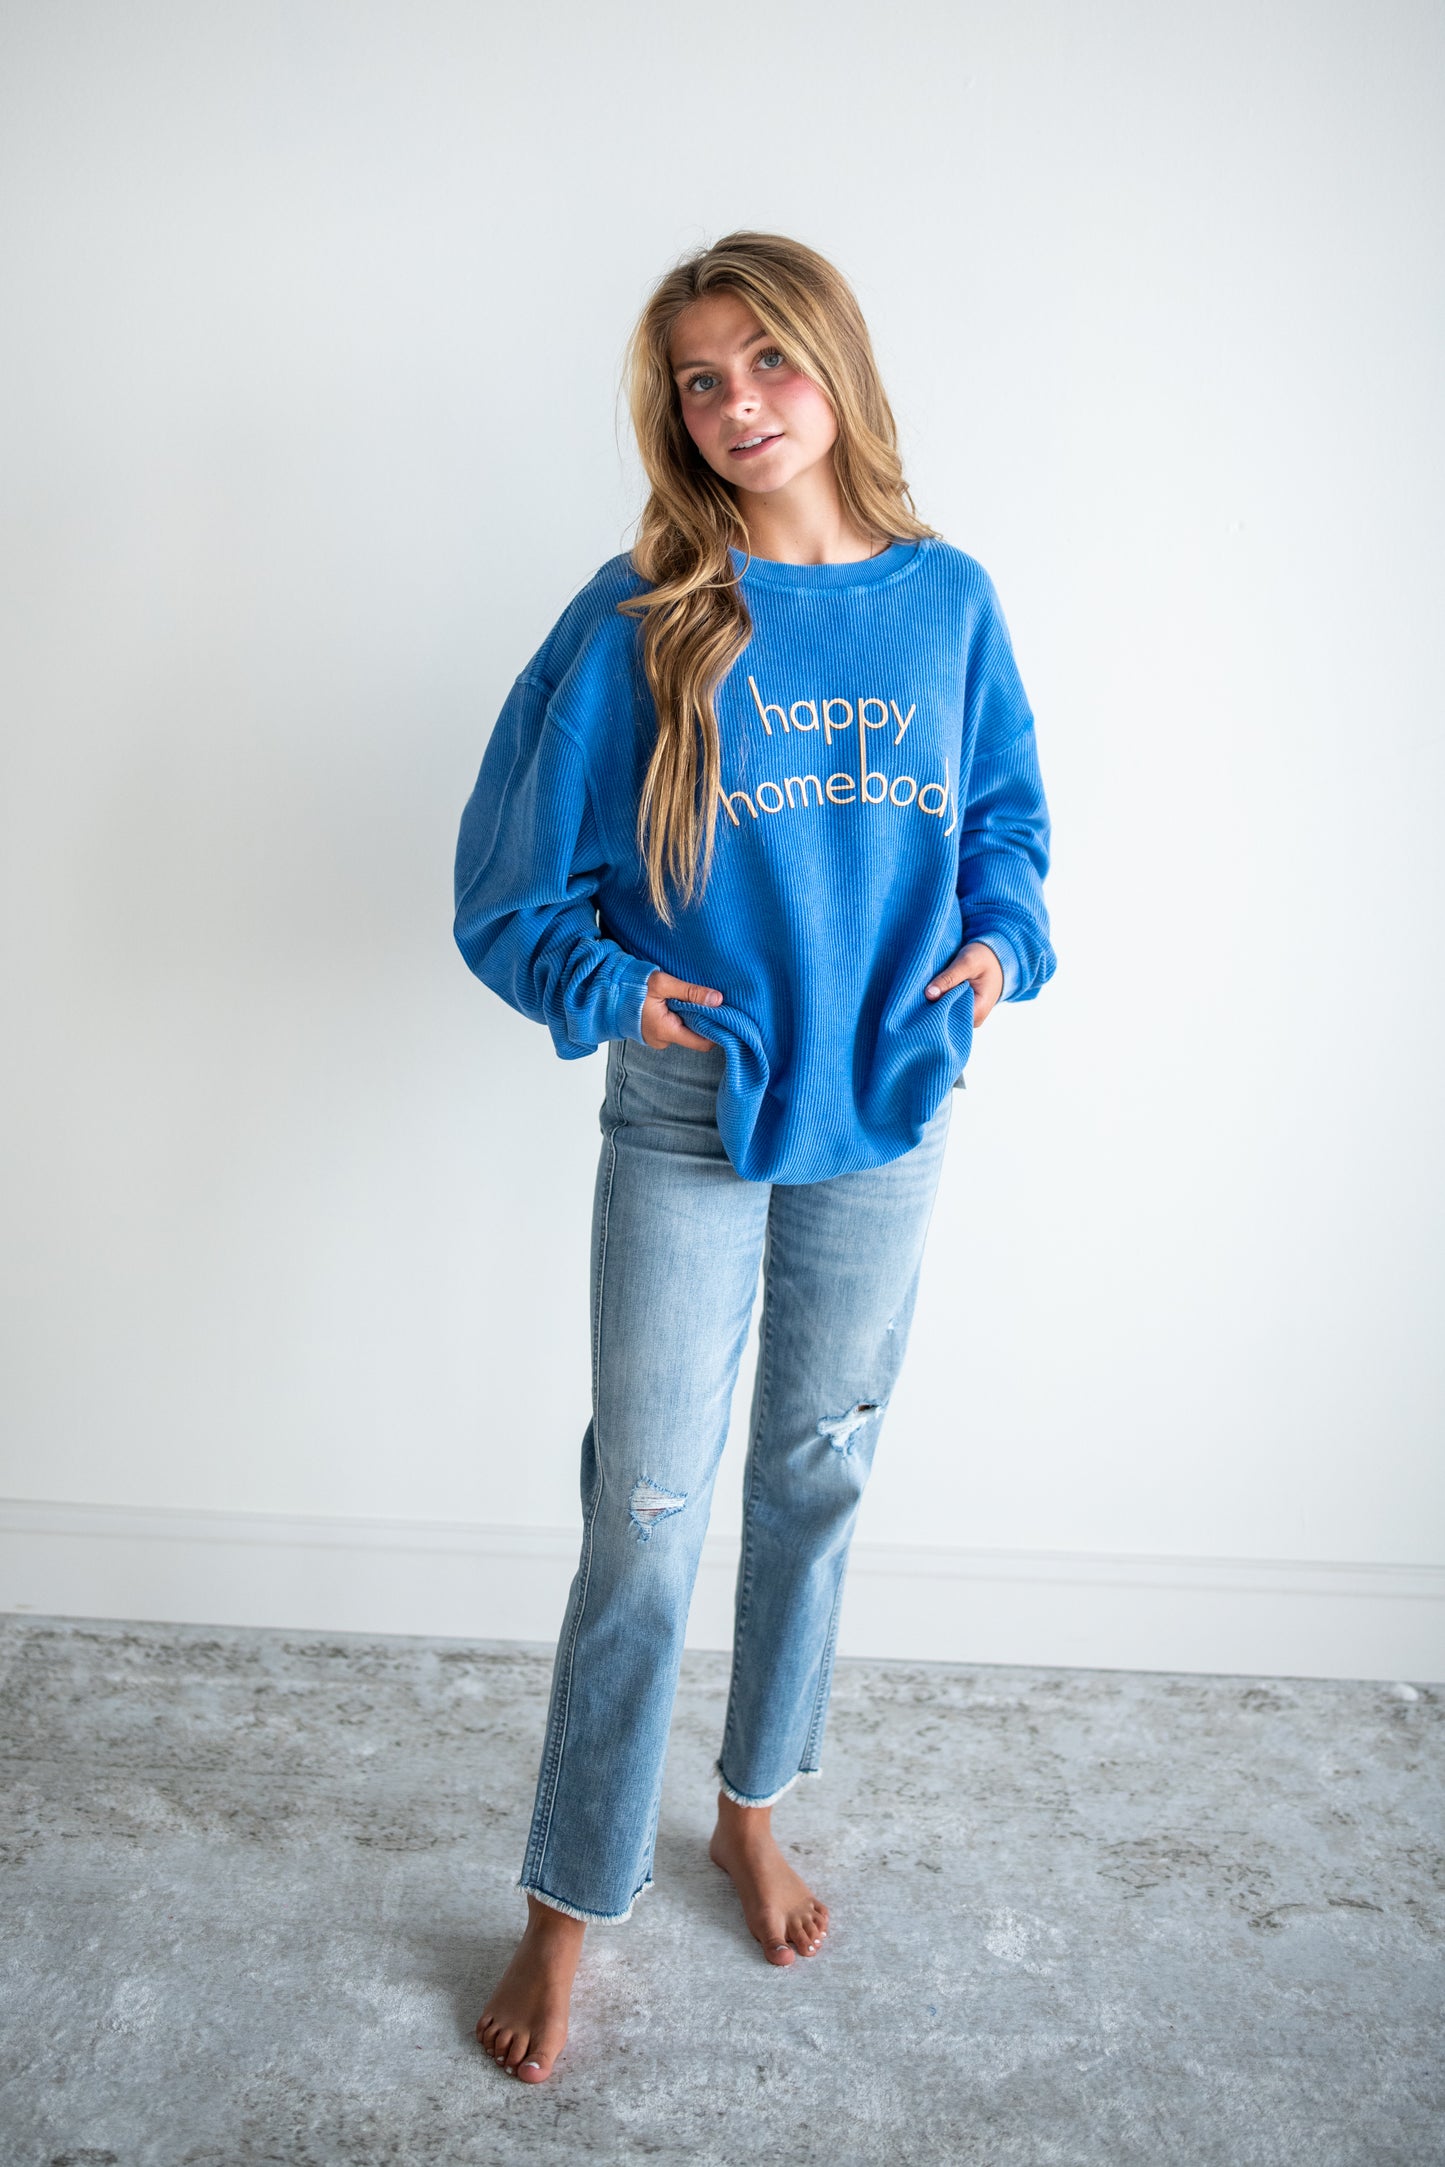 Happy Homebody Ribbed Sweater - Blue